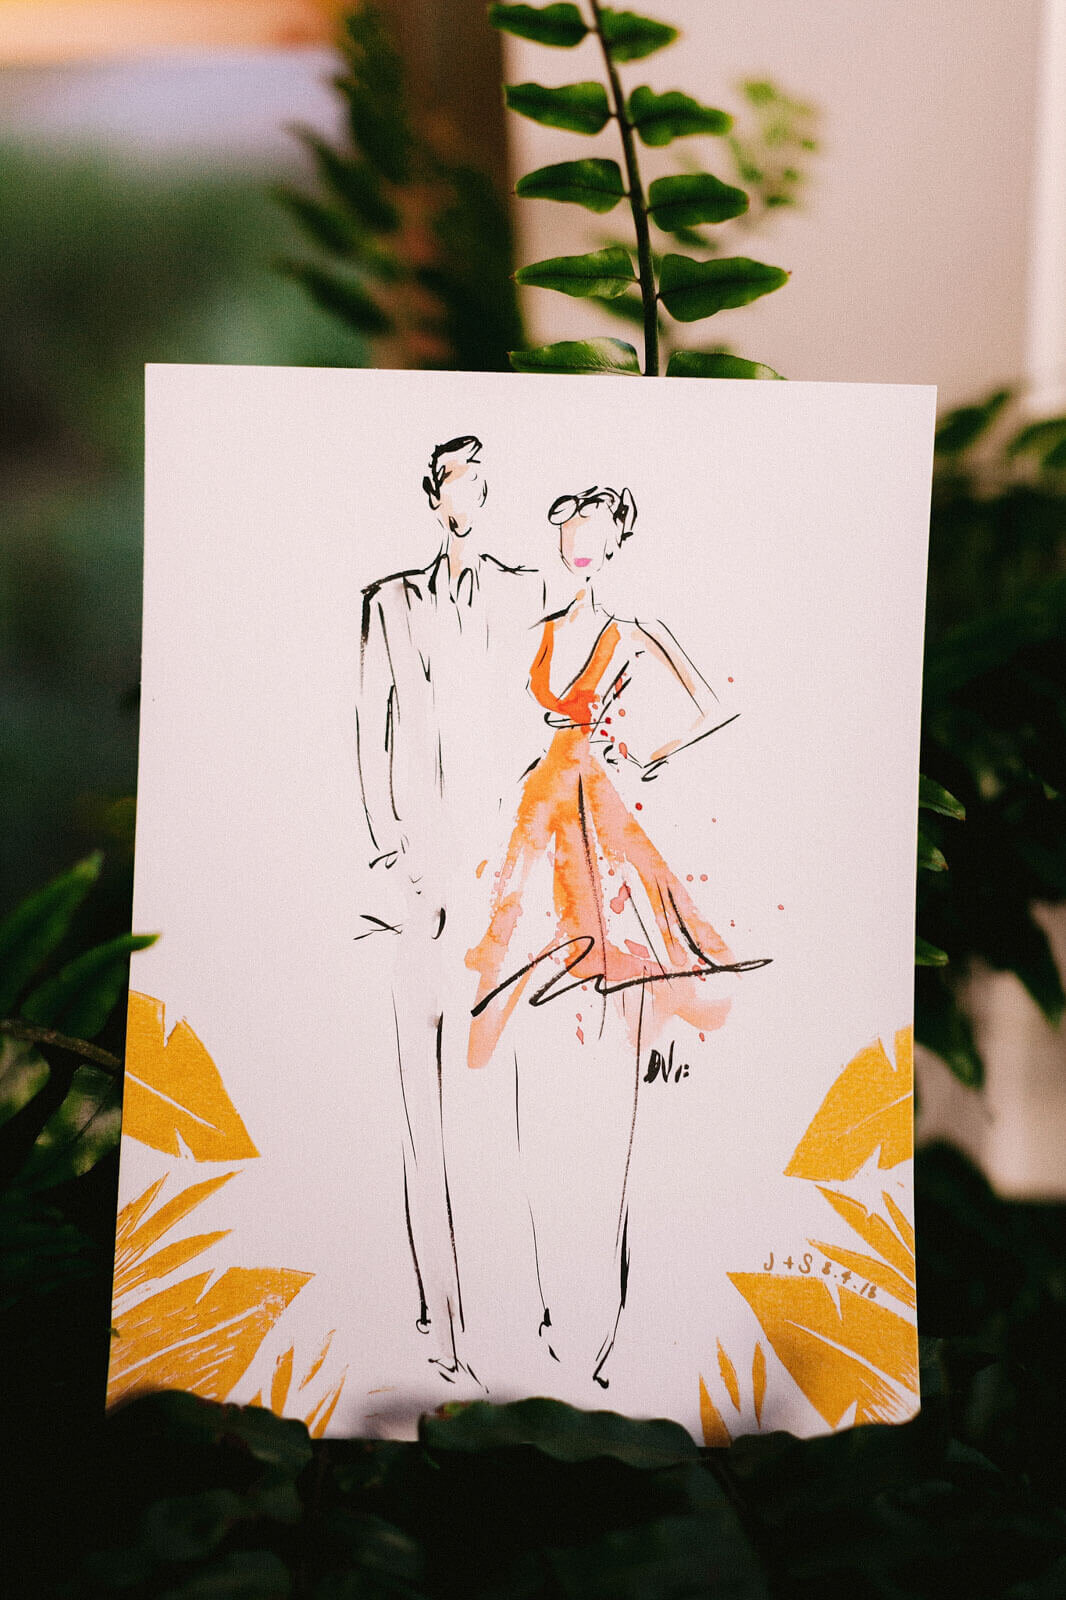 A pretty sketch of a man and woman amidst green leaves in Montage at Palmetto Bluff. Destination Wedding Image by Jenny Fu Studio